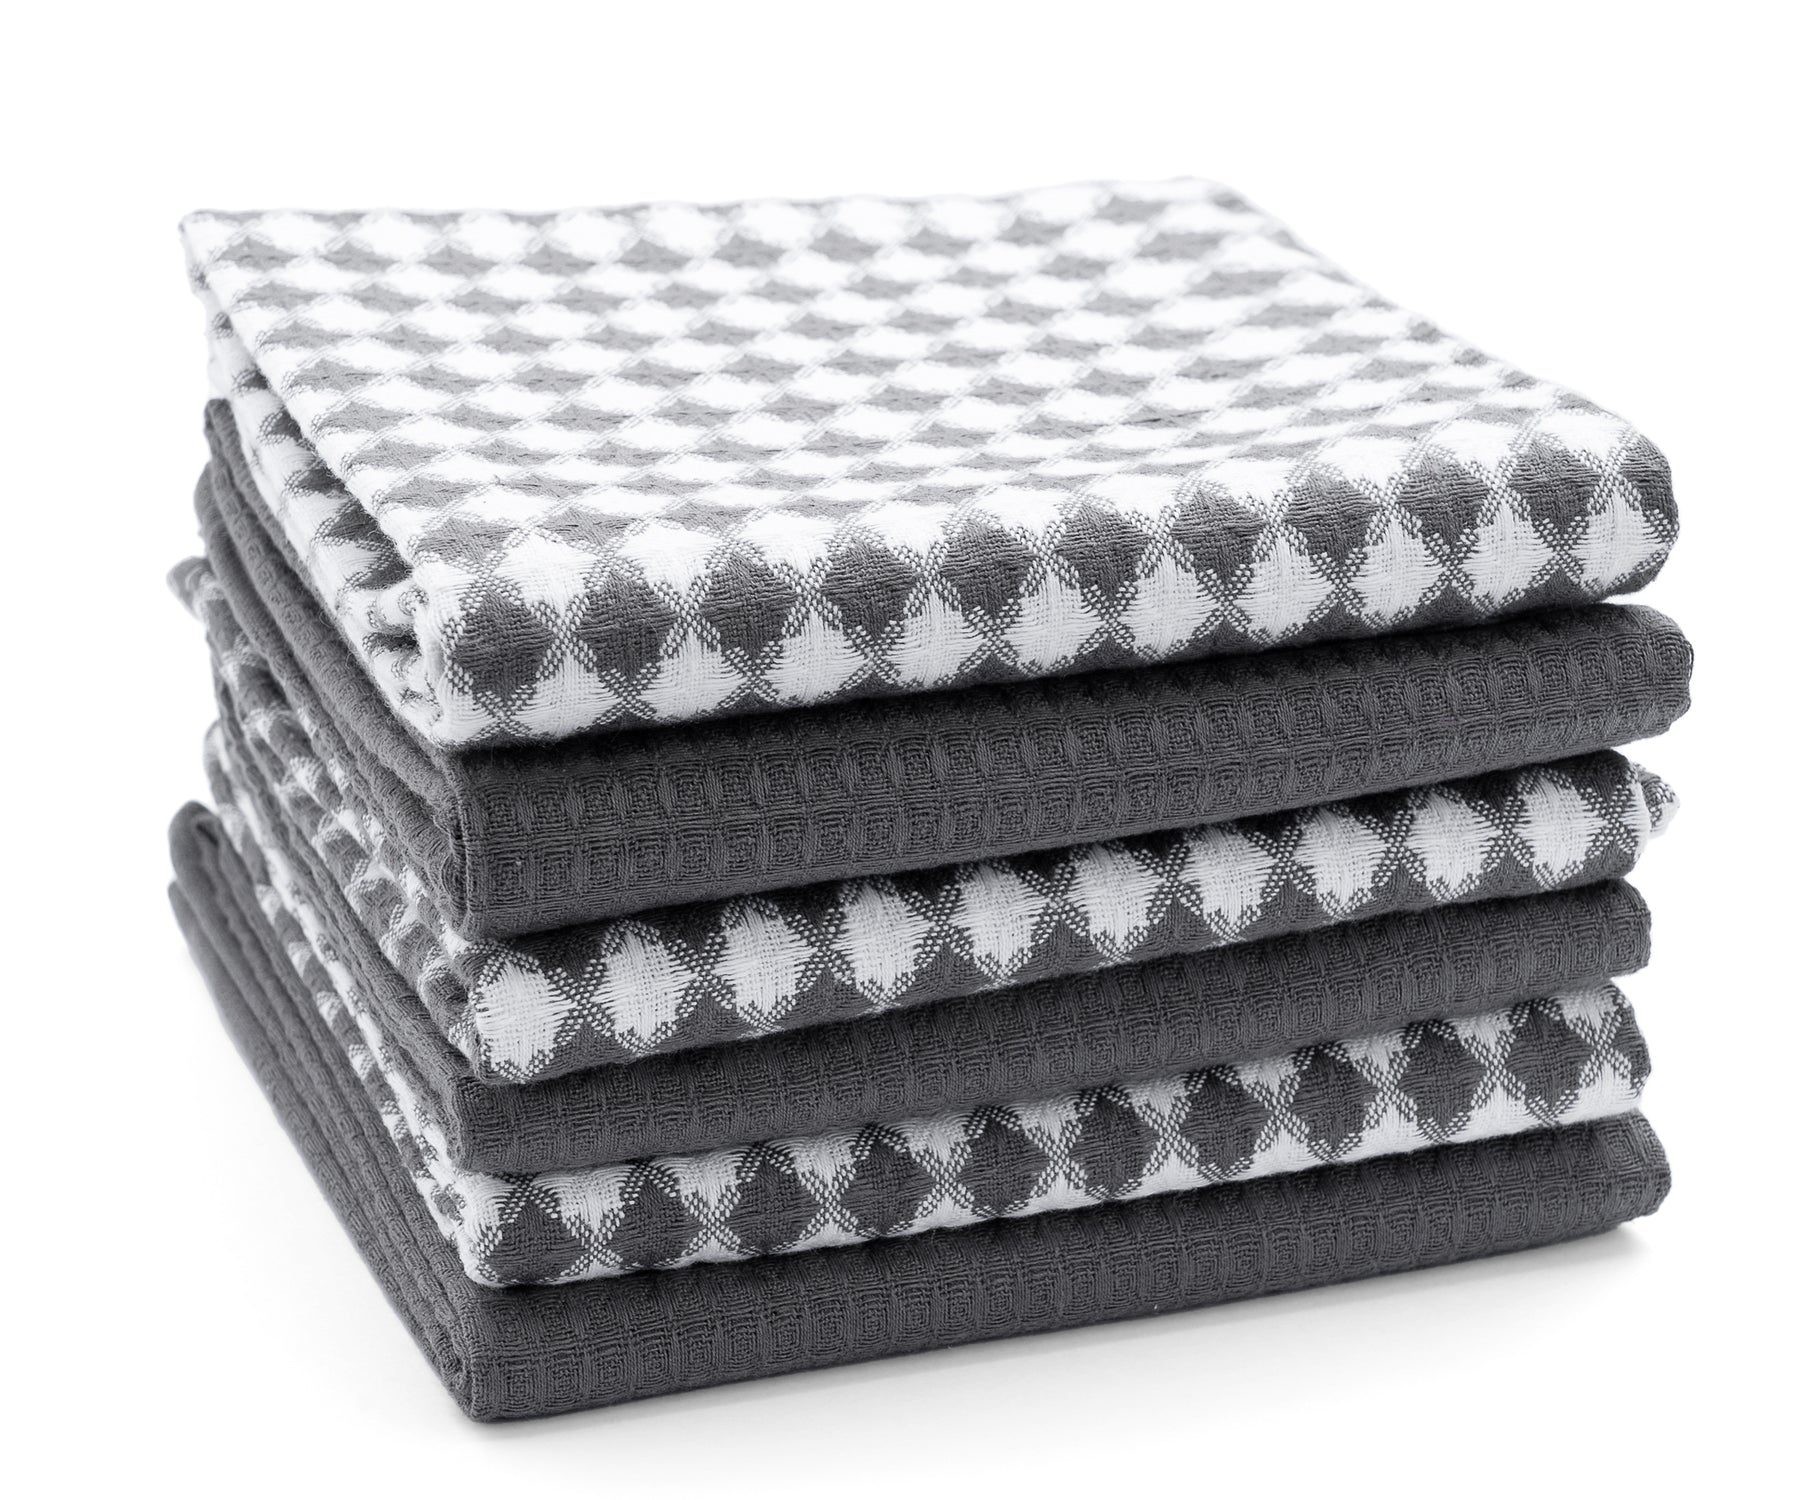 Kitchen wash cloths with striped pattern are absorbent dish towels, decorative kitchen towels.